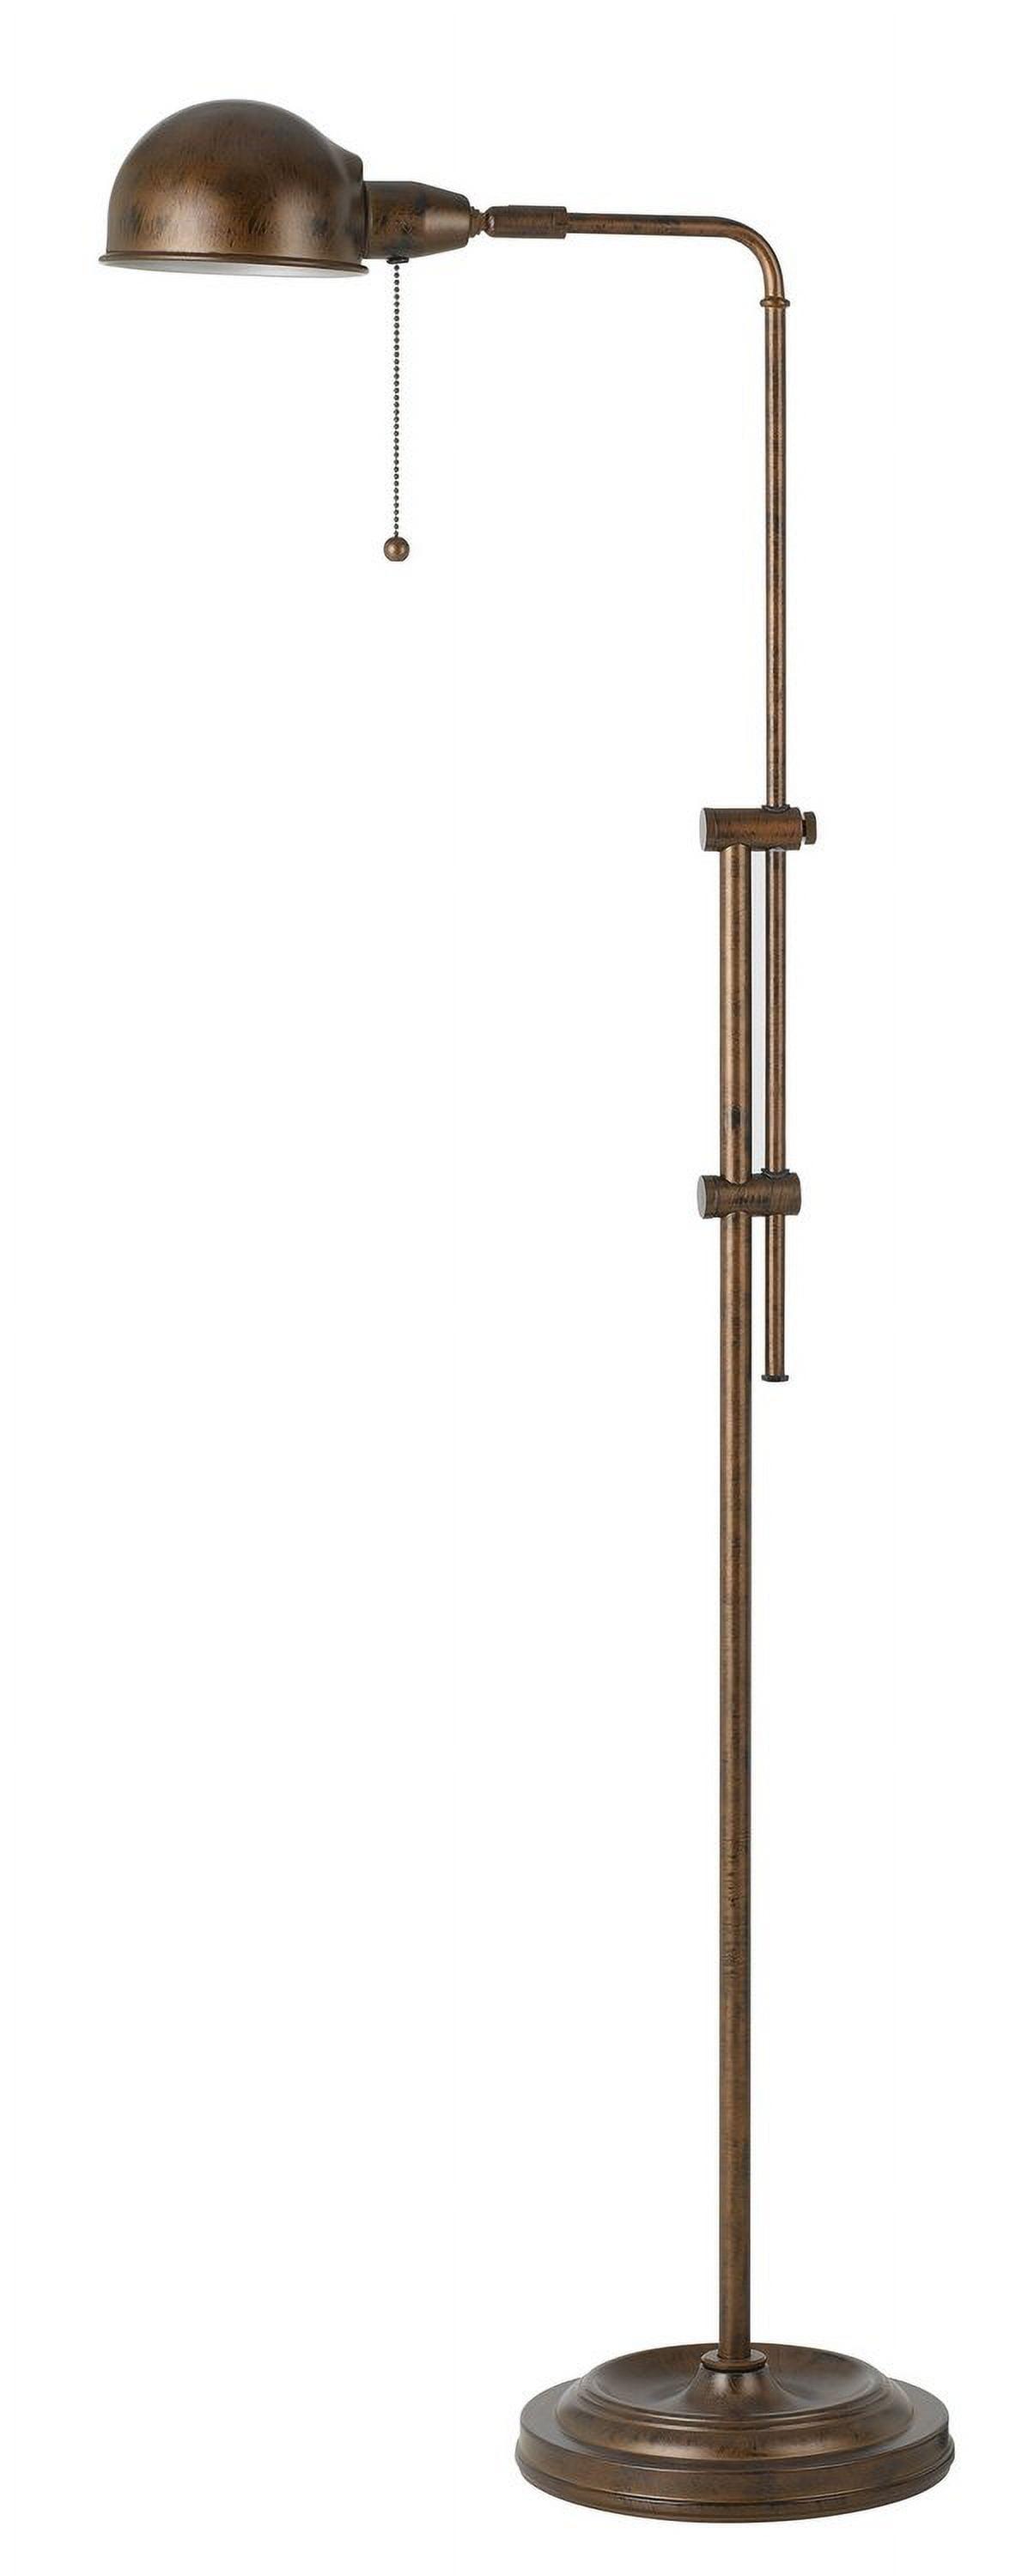 Adjustable Bronze Pharmacy Floor Lamp with Pull Chain Switch